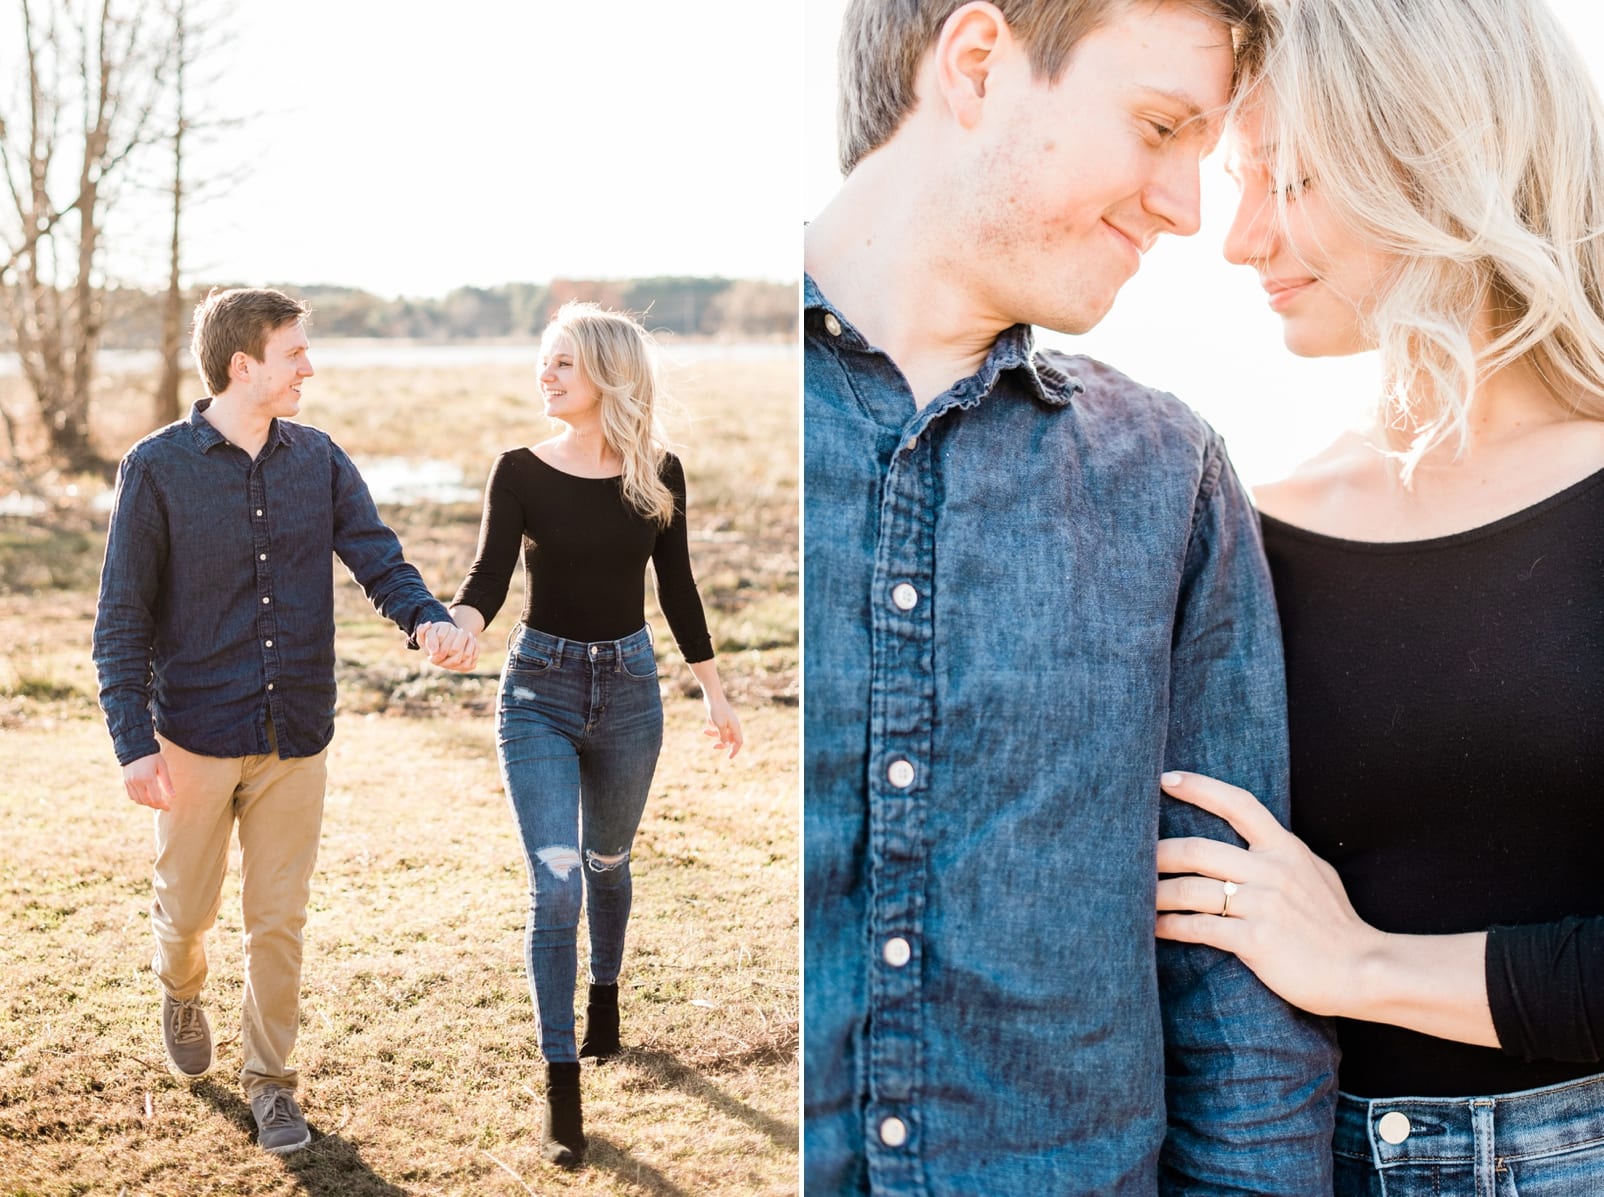 Winter engagement couple walking and holding hands during their session photo